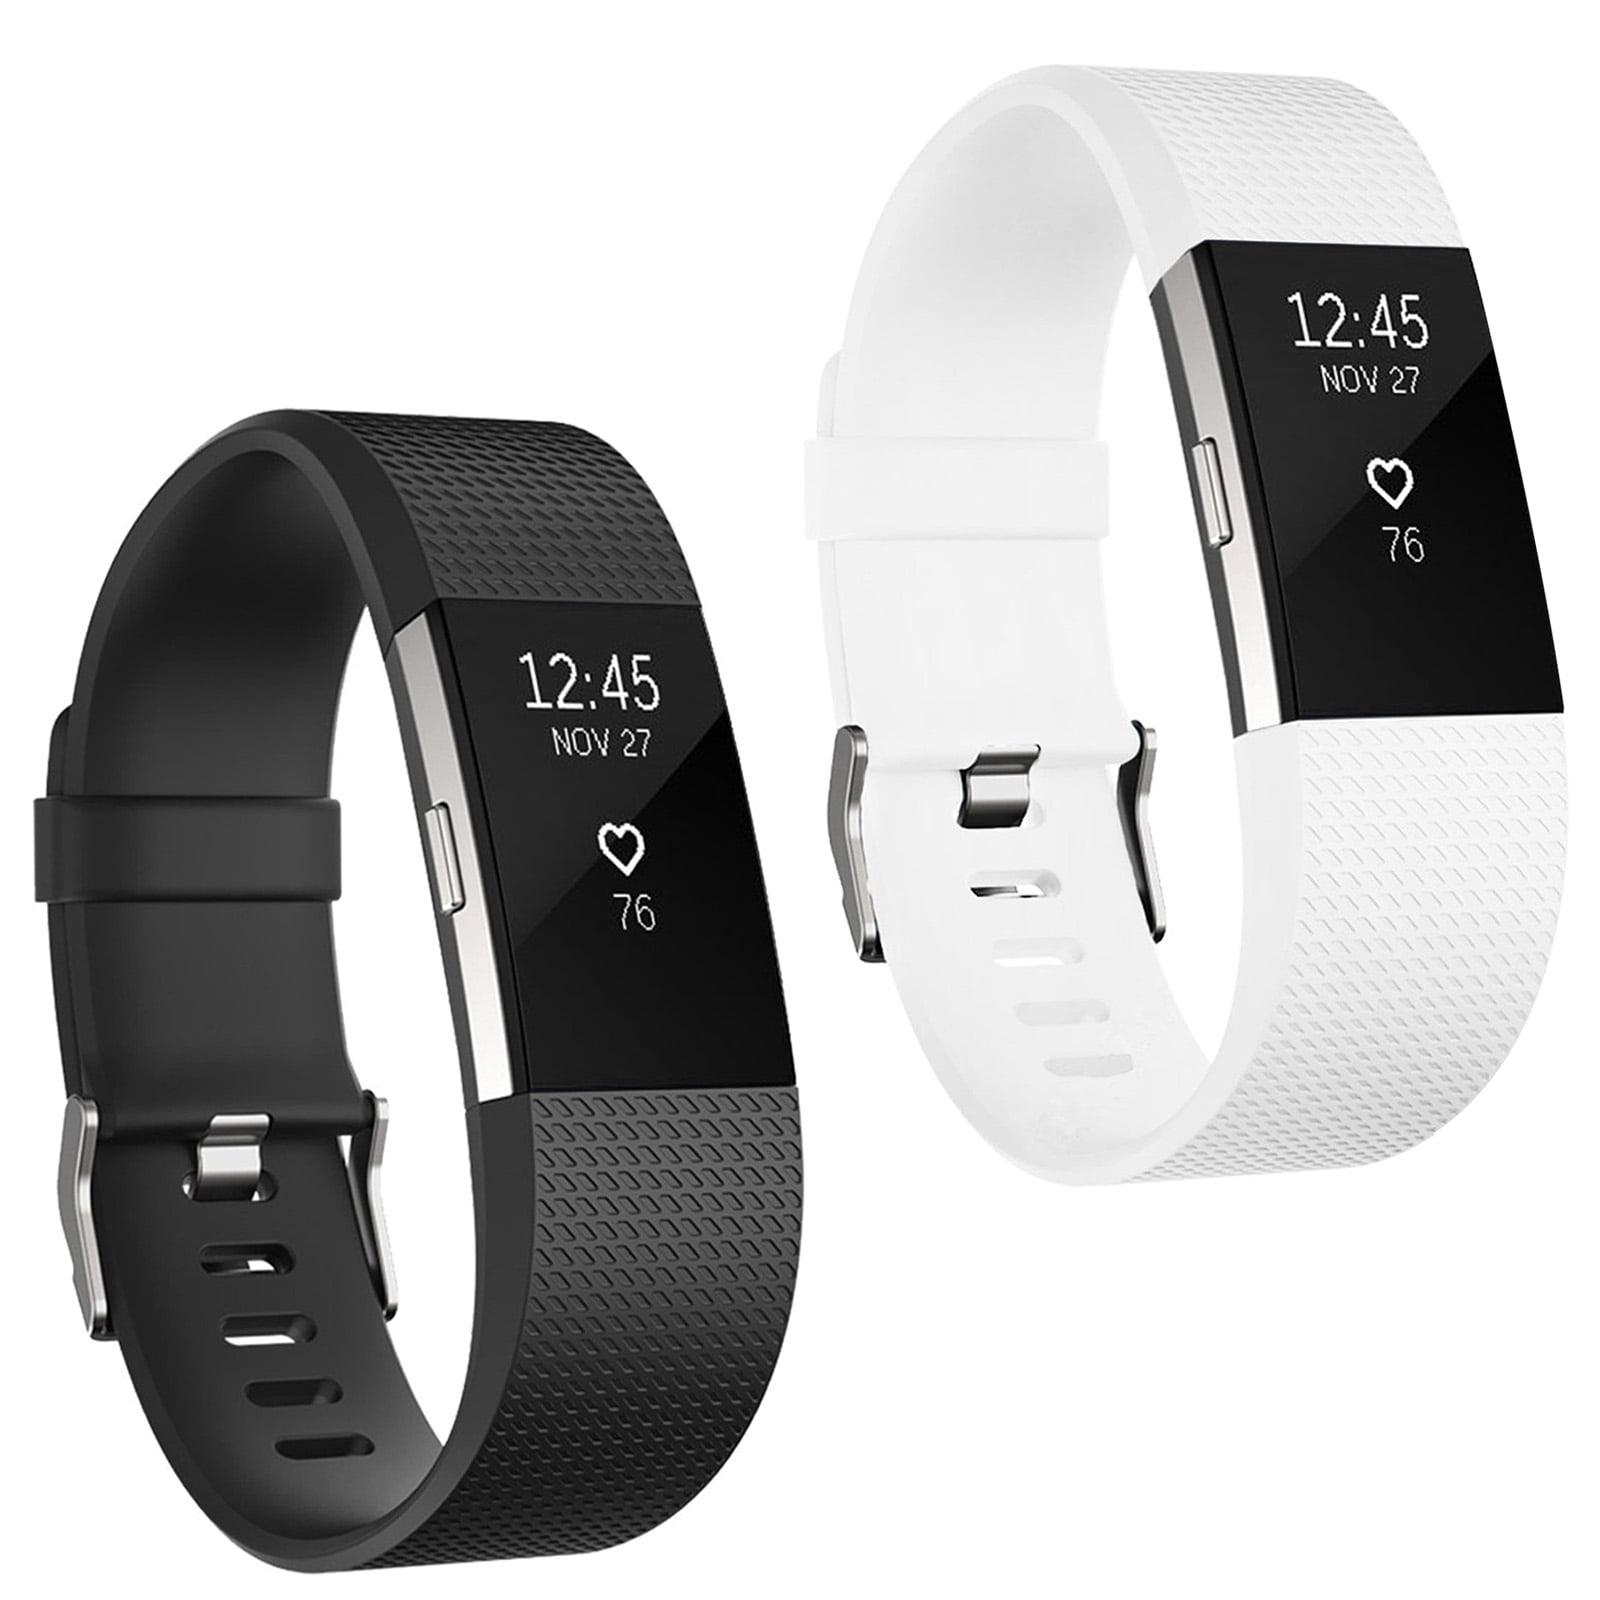 Packs Bands Fit for Fitbit Charge 2 